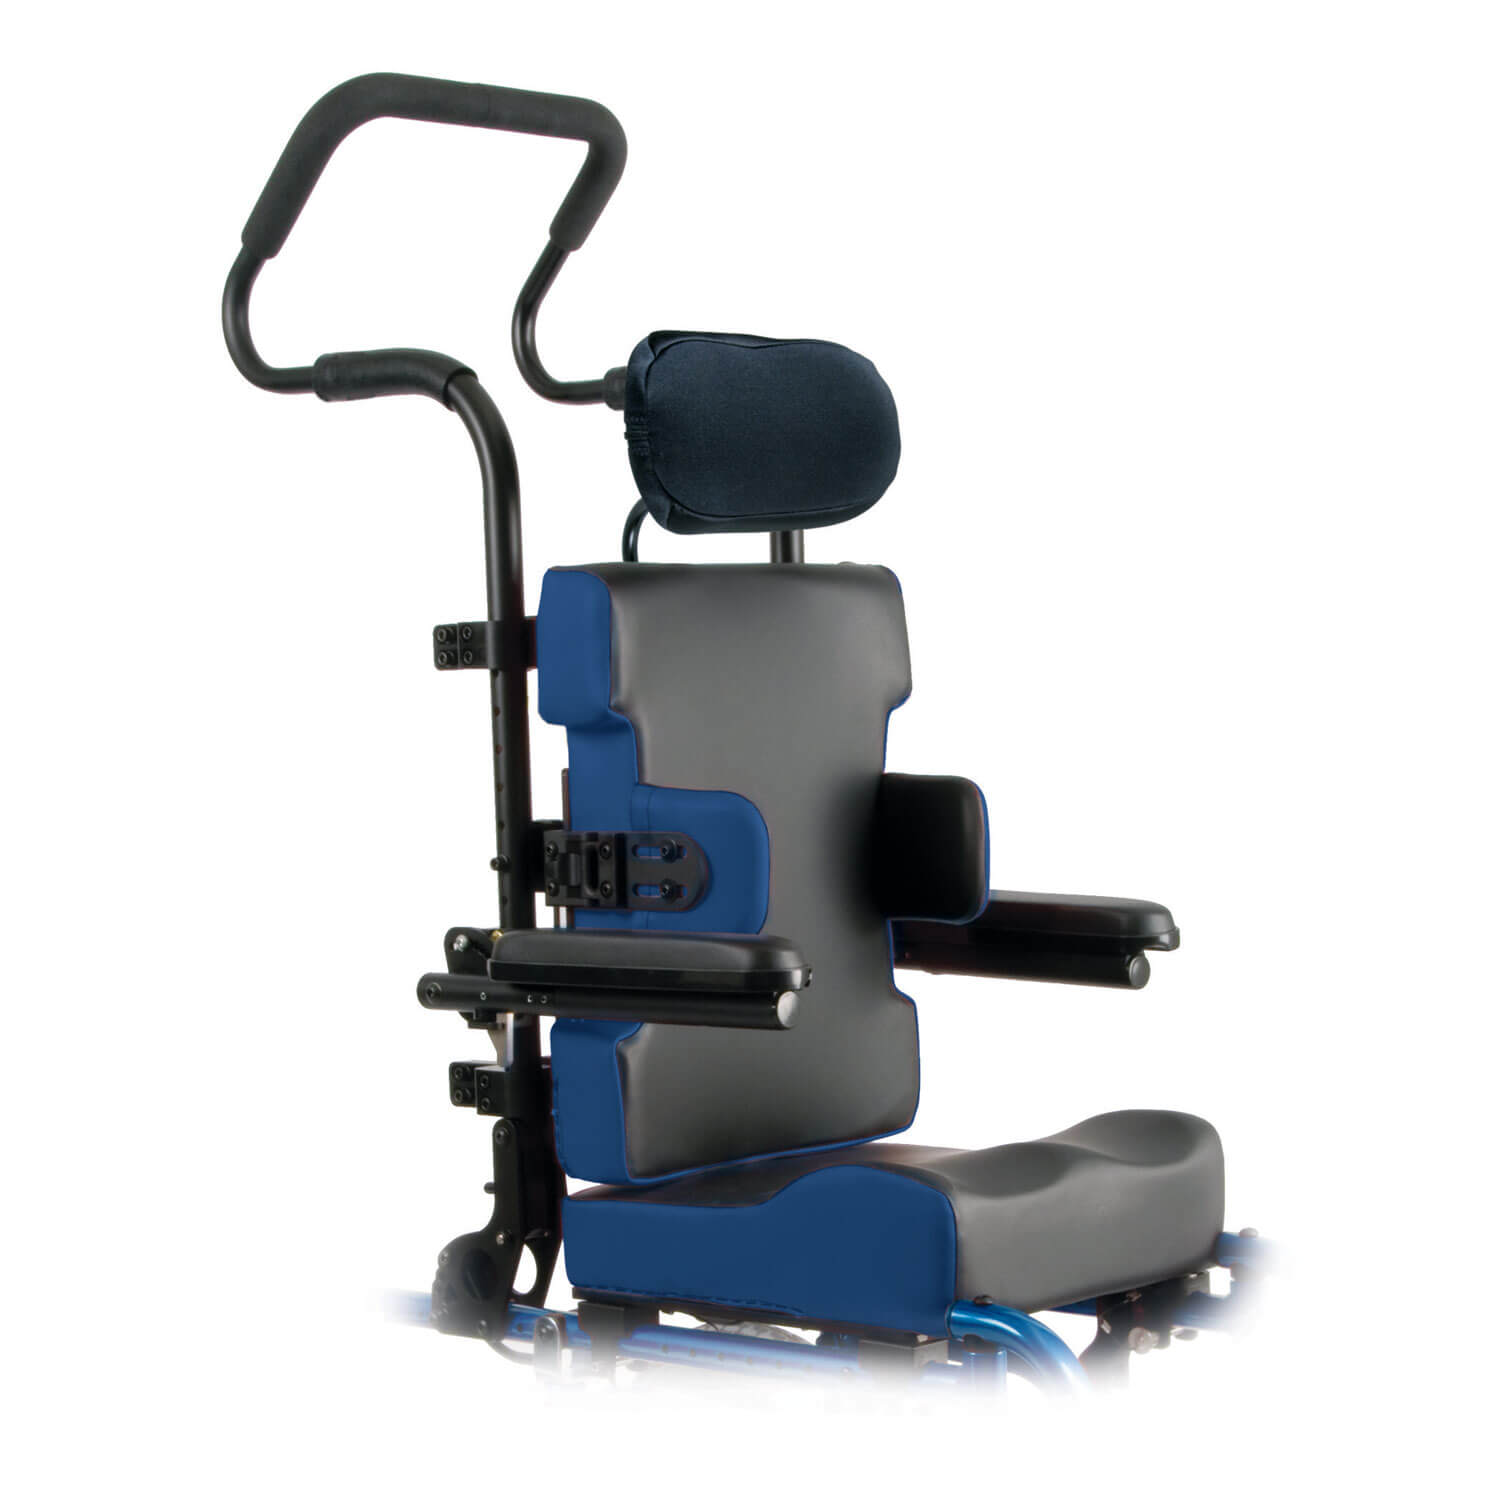 JAY SureFit Made-to-Order Seating